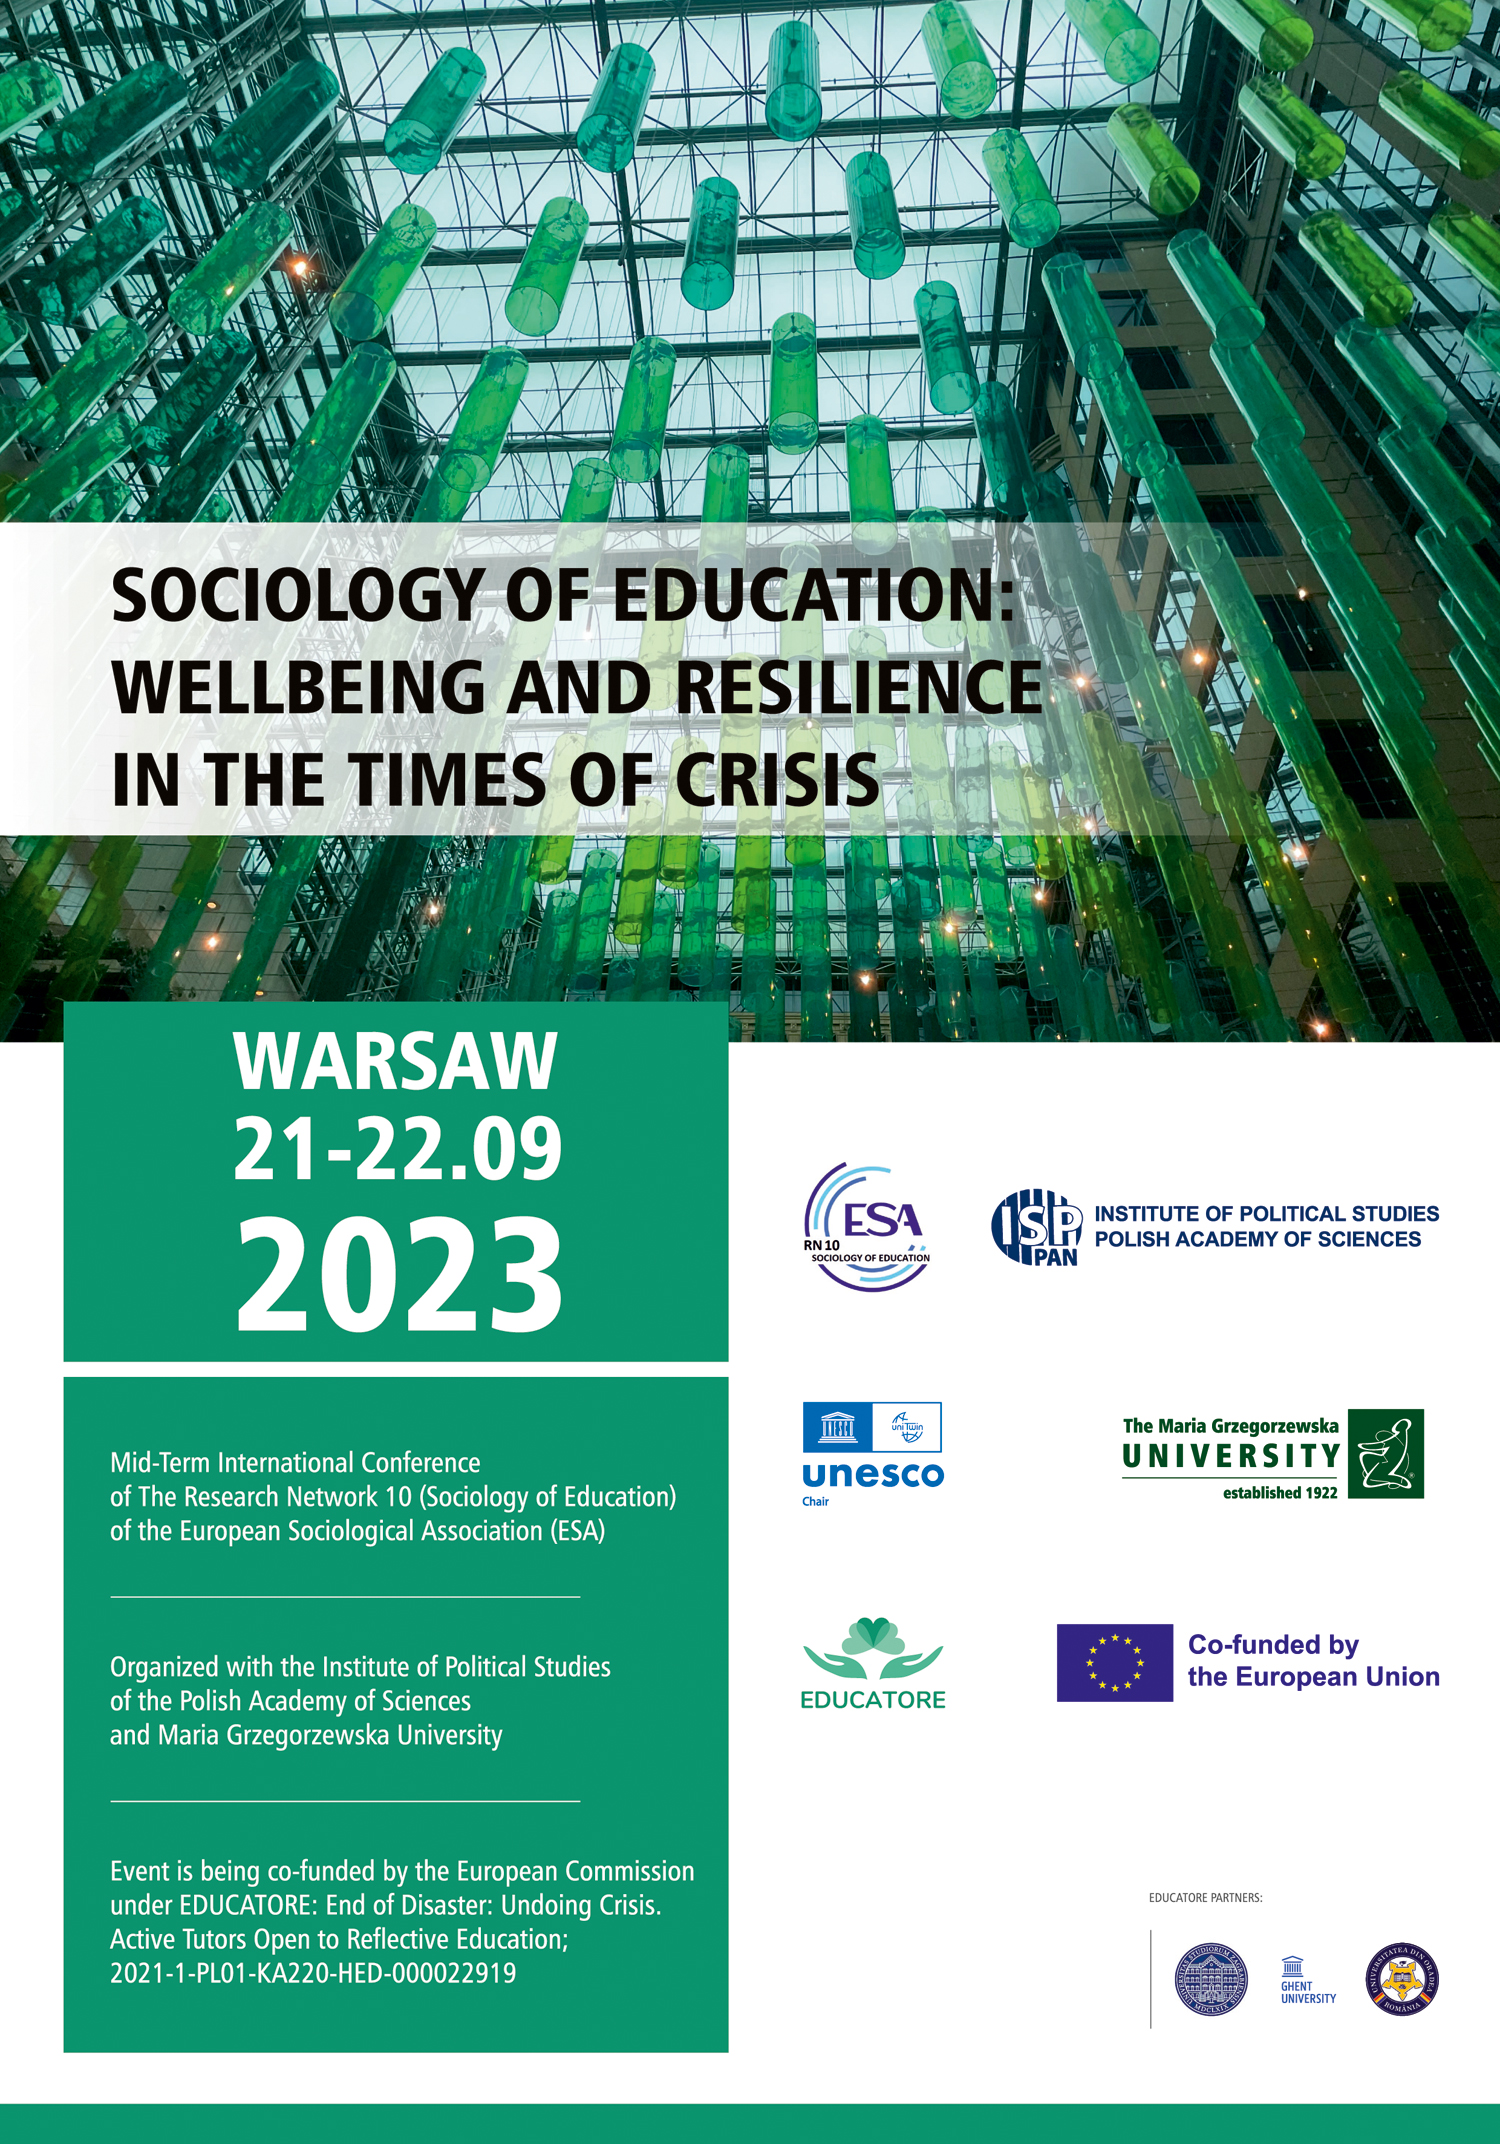 Conference Poster, including logos